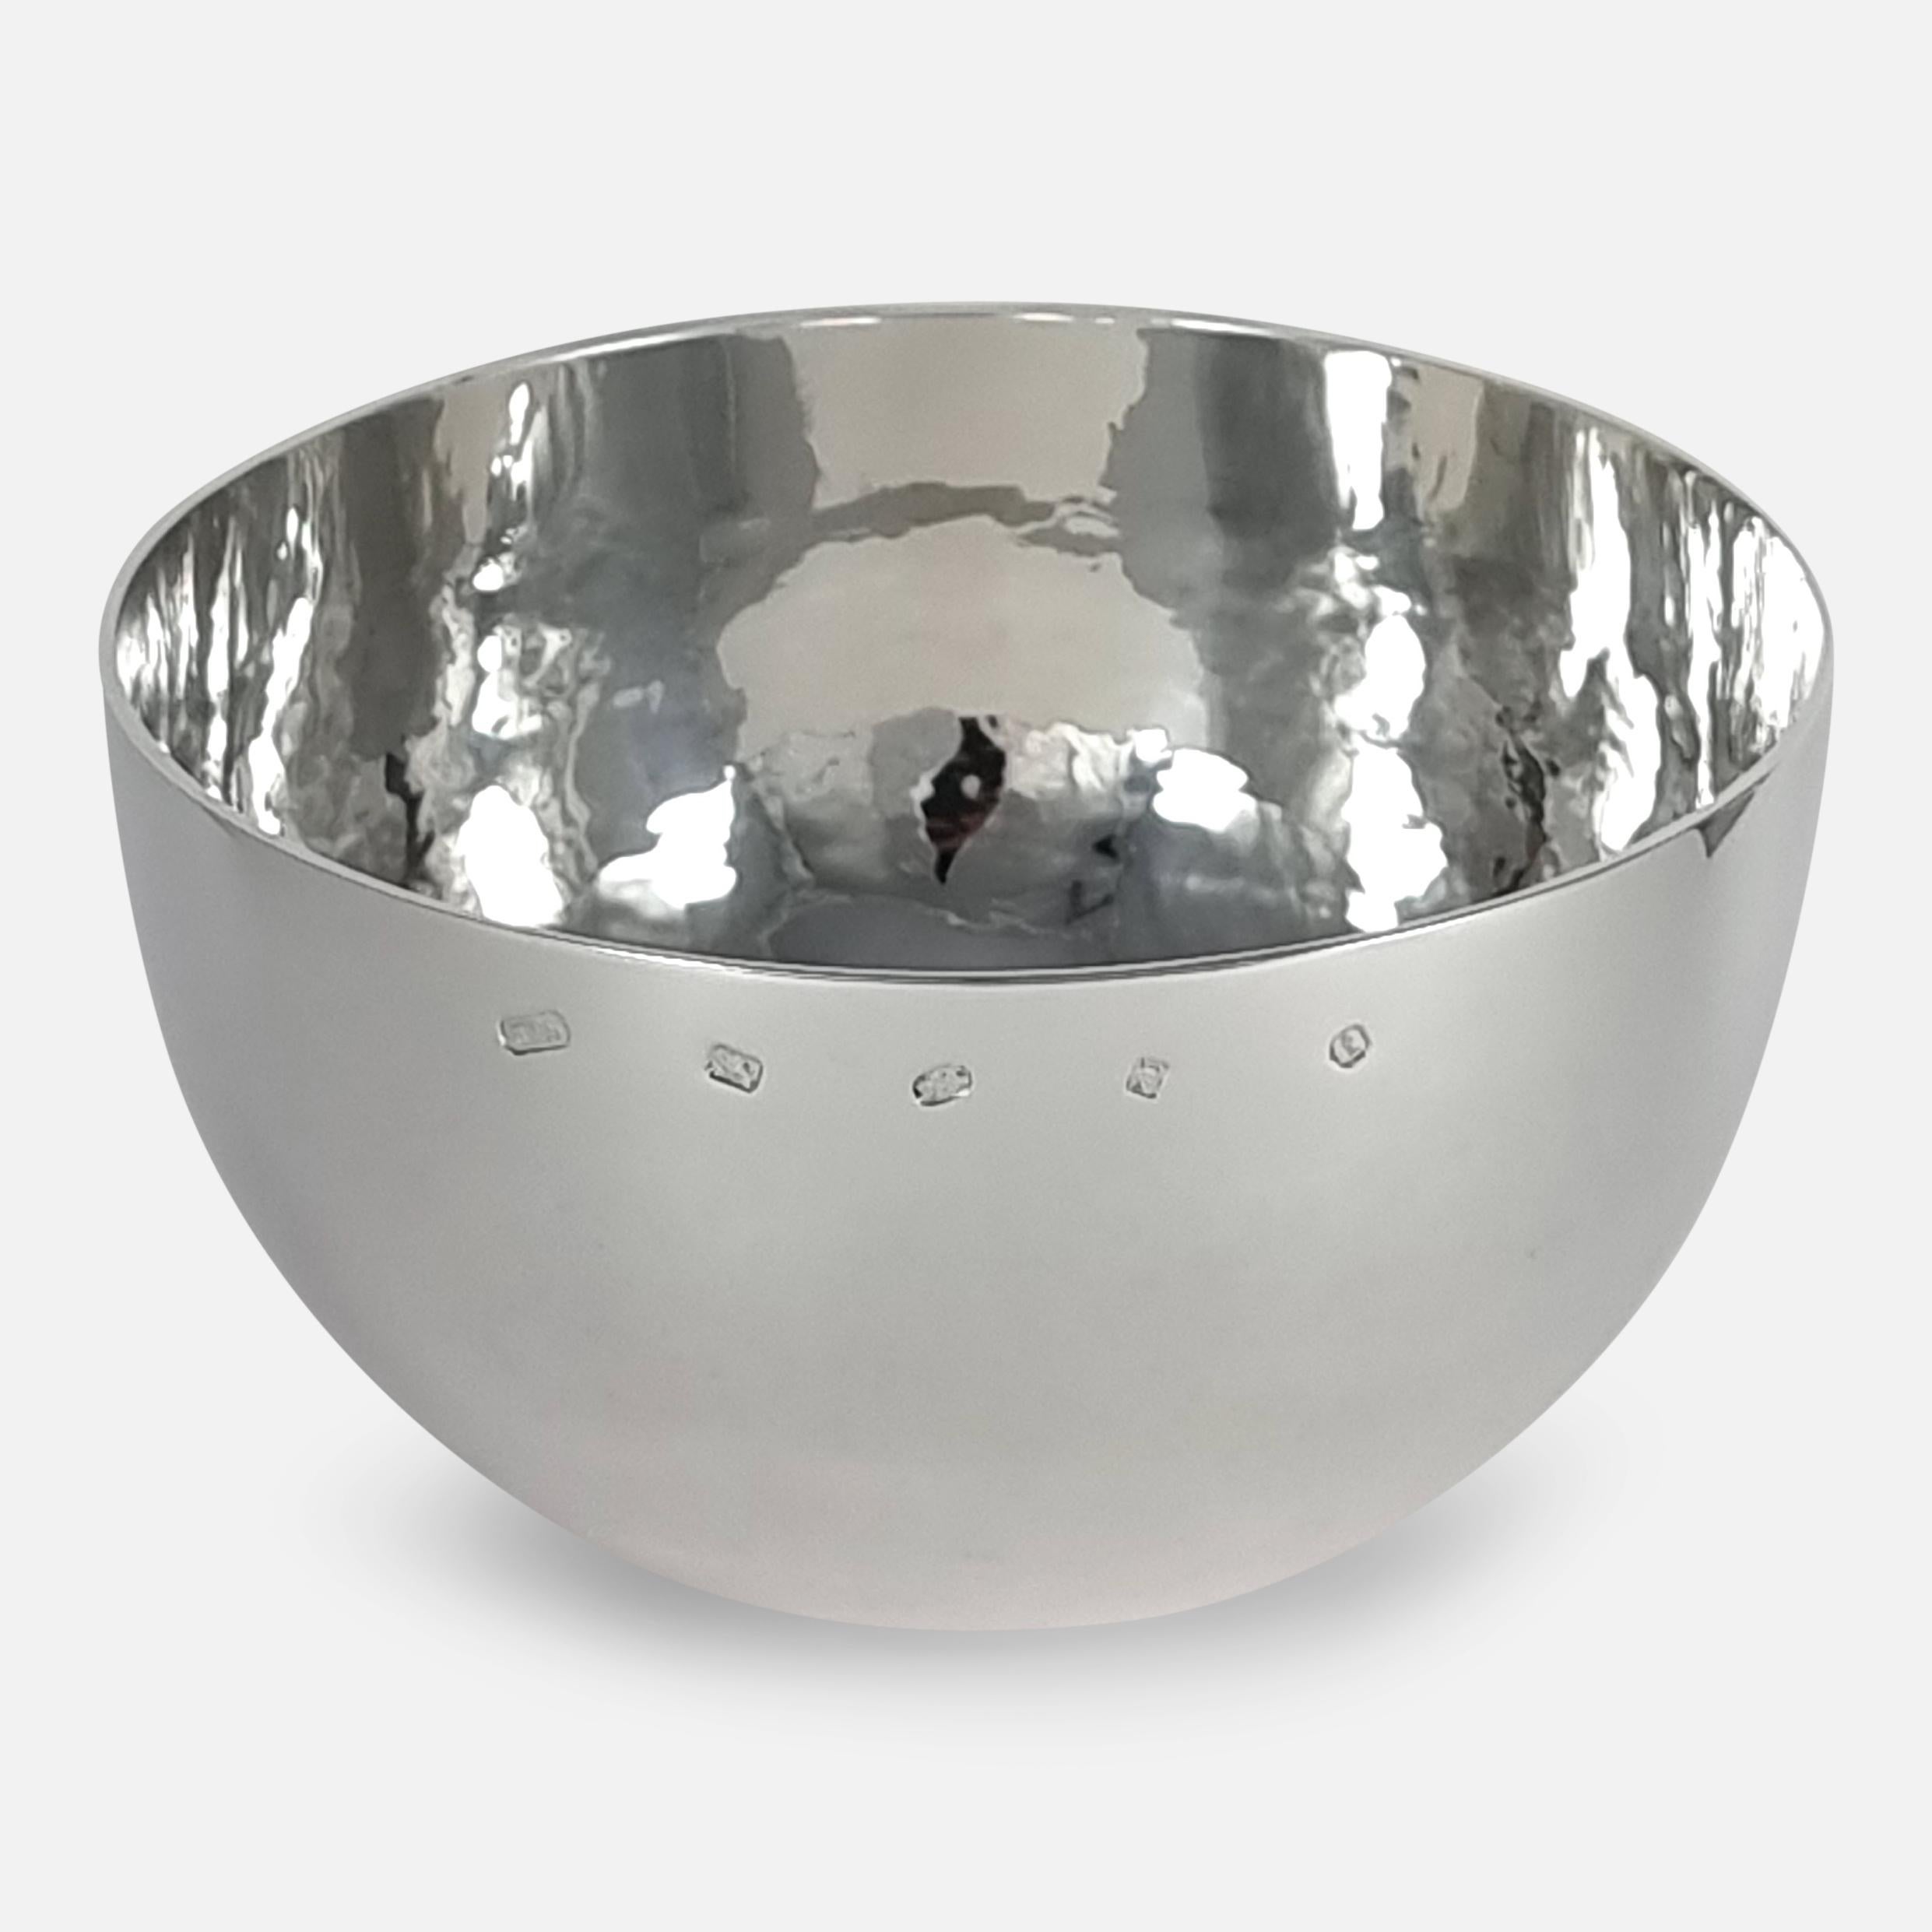 An Elizabeth II sterling silver tumble fruit bowl. The planished silver bowl is crafted in the style of an oversized tumbler cup.

It is hallmarked with the makers mark of William & Son (William Asprey), with London assay marks, and date letter 't'